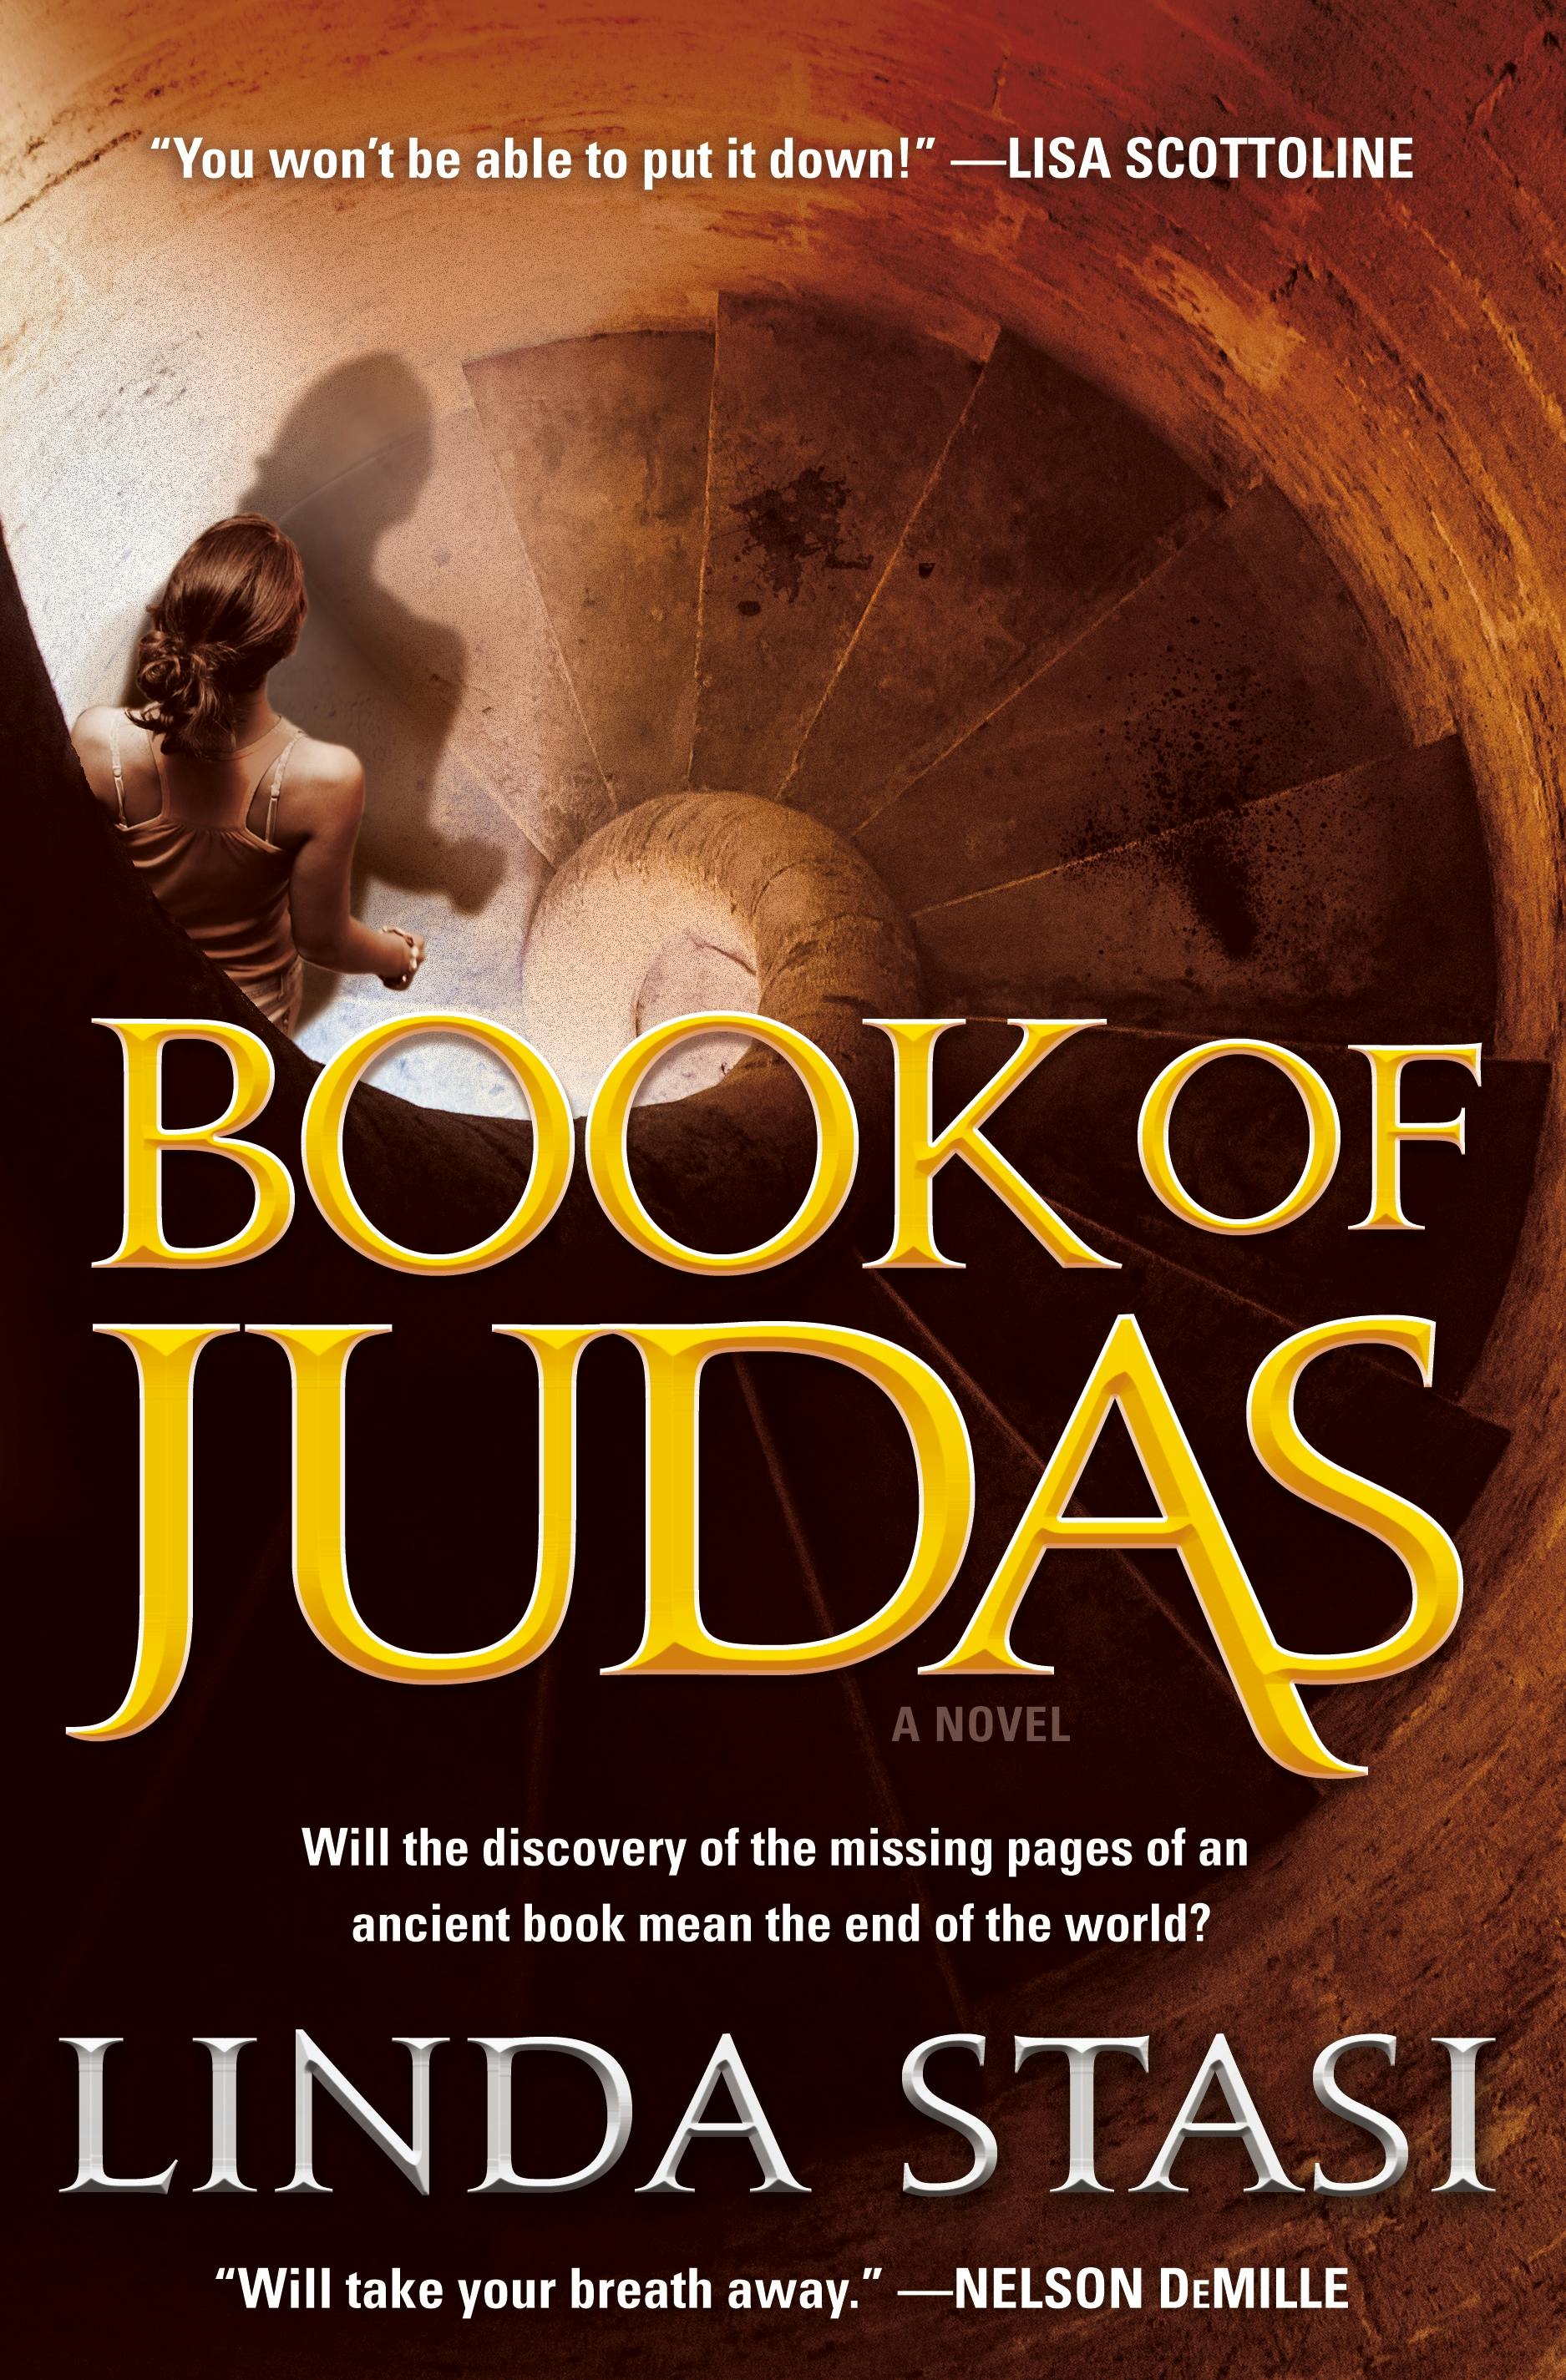 Cover for the book titled as: Book of Judas